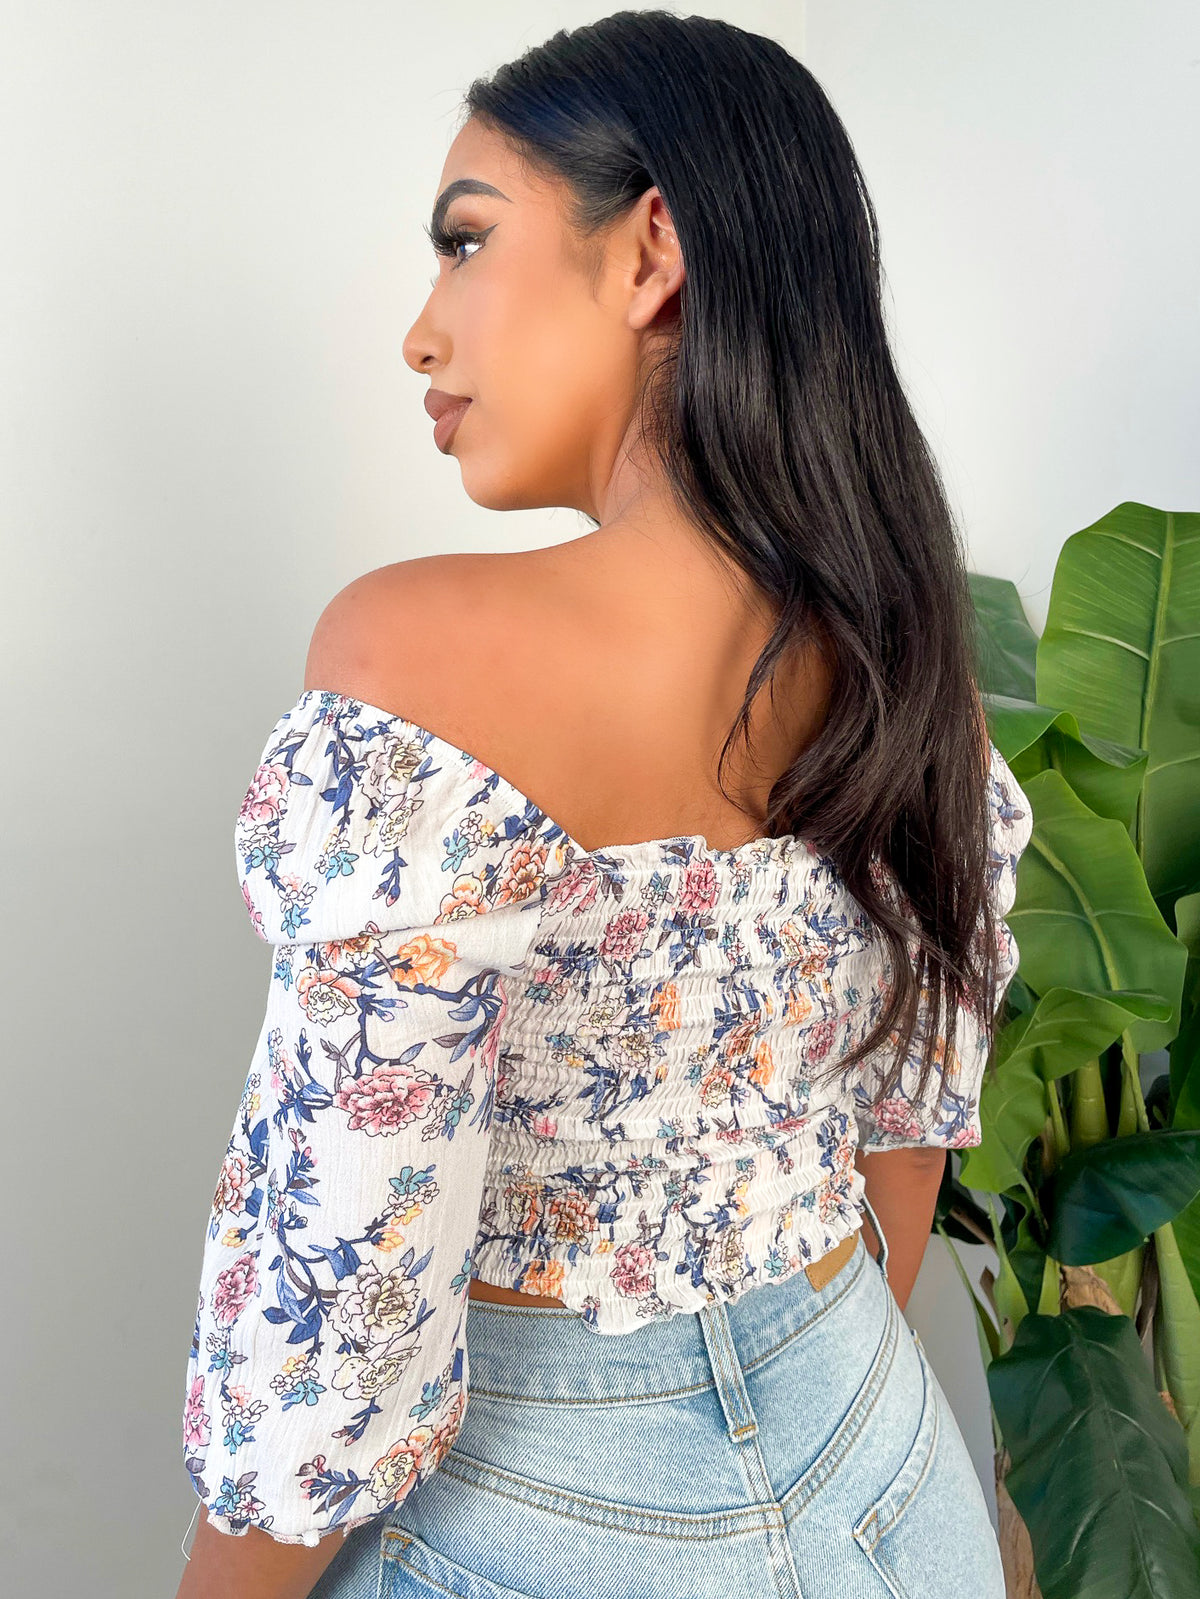 white top, crop top, off the shoulder floral top, floral, 3/4 sleeves, scrunched, front tie, elastic sleeves 